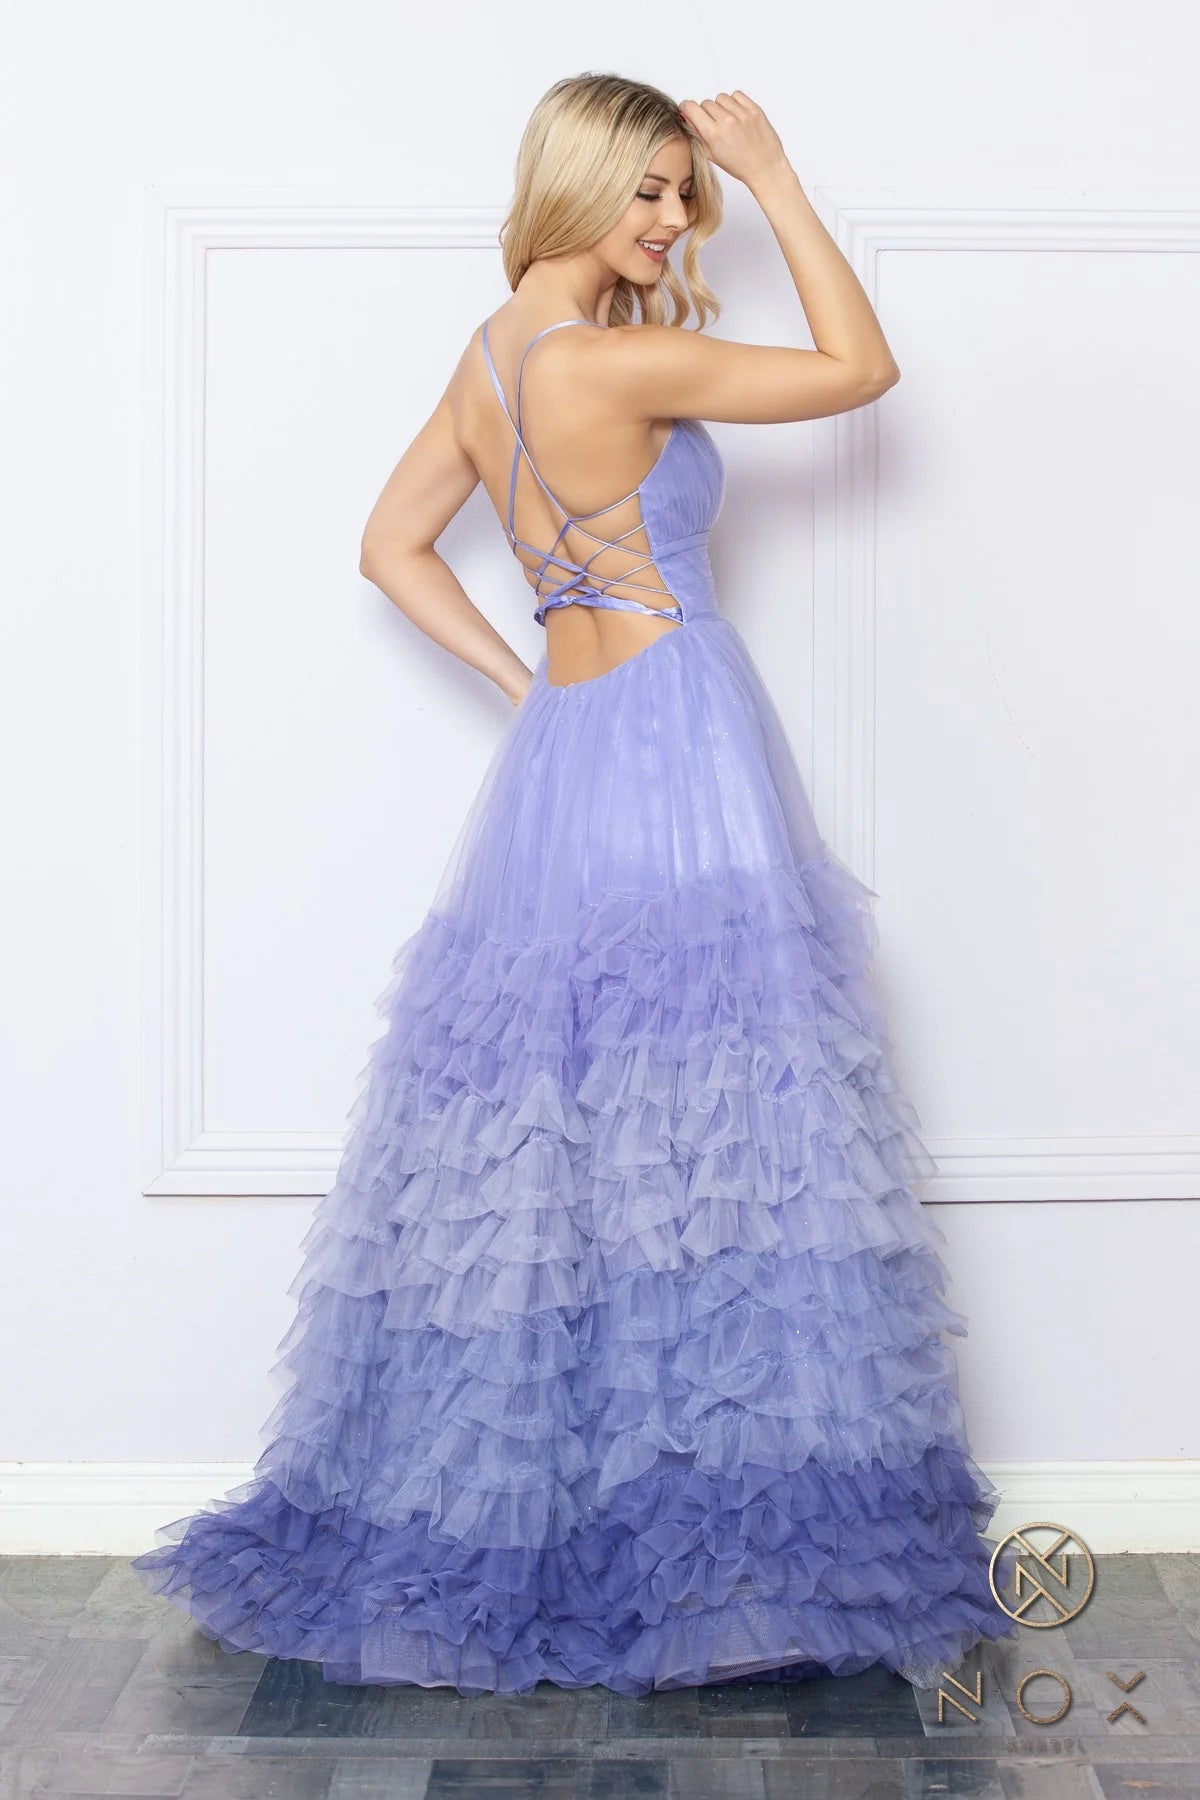 Spaghetti Strap Ruffled Ombre gown with a slit